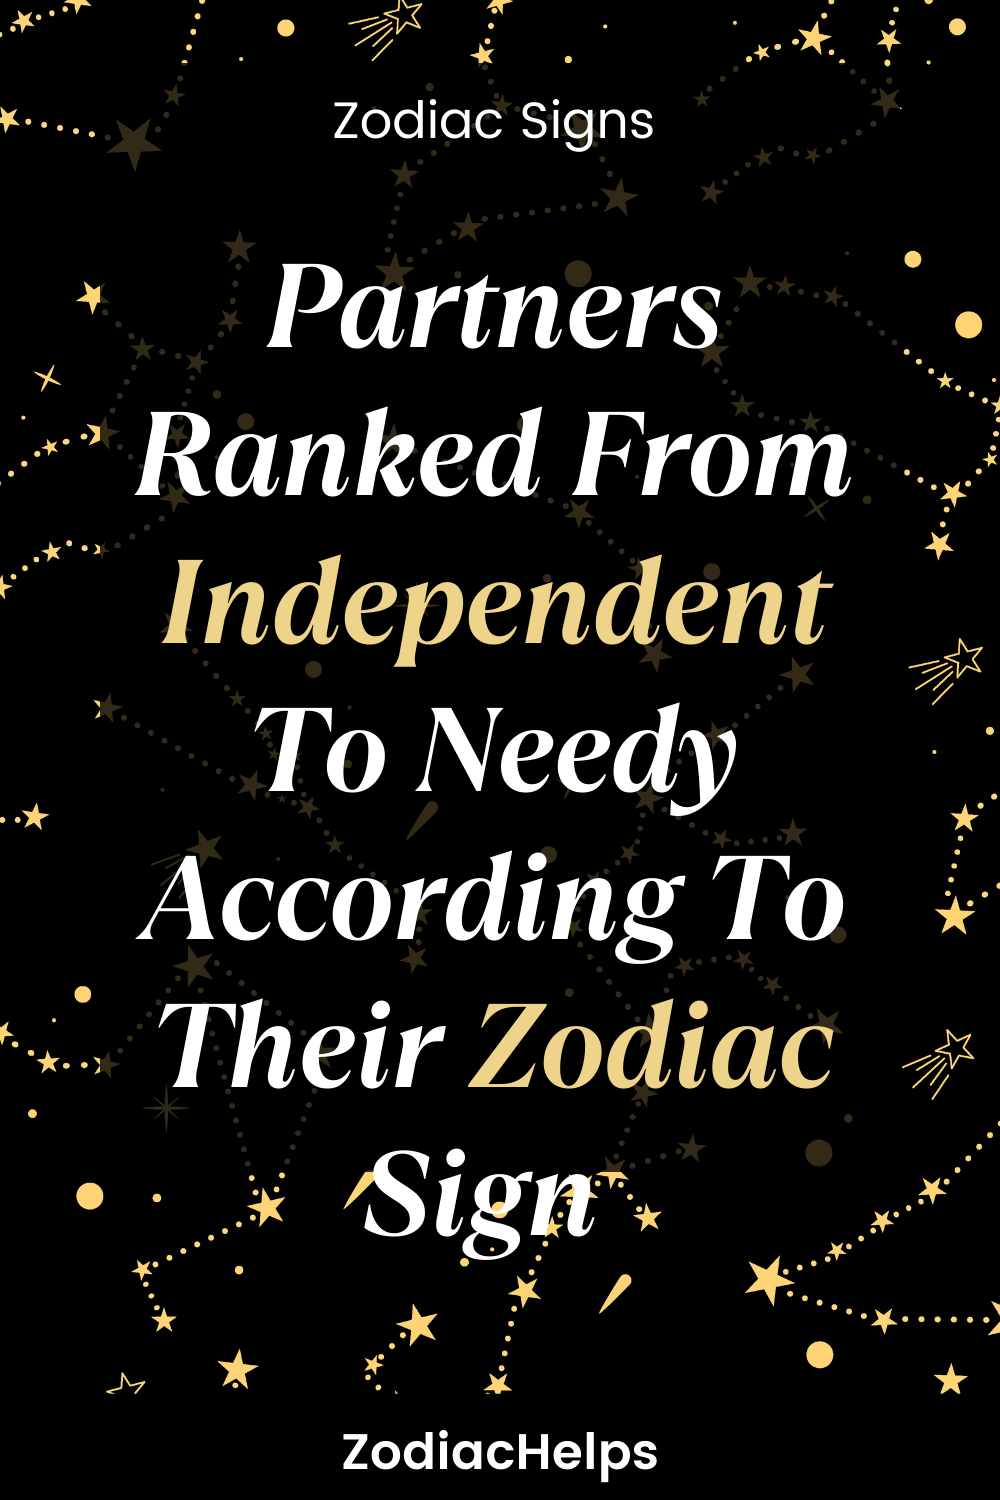 Partners Ranked From Independent To Needy According To Their Zodiac Sign